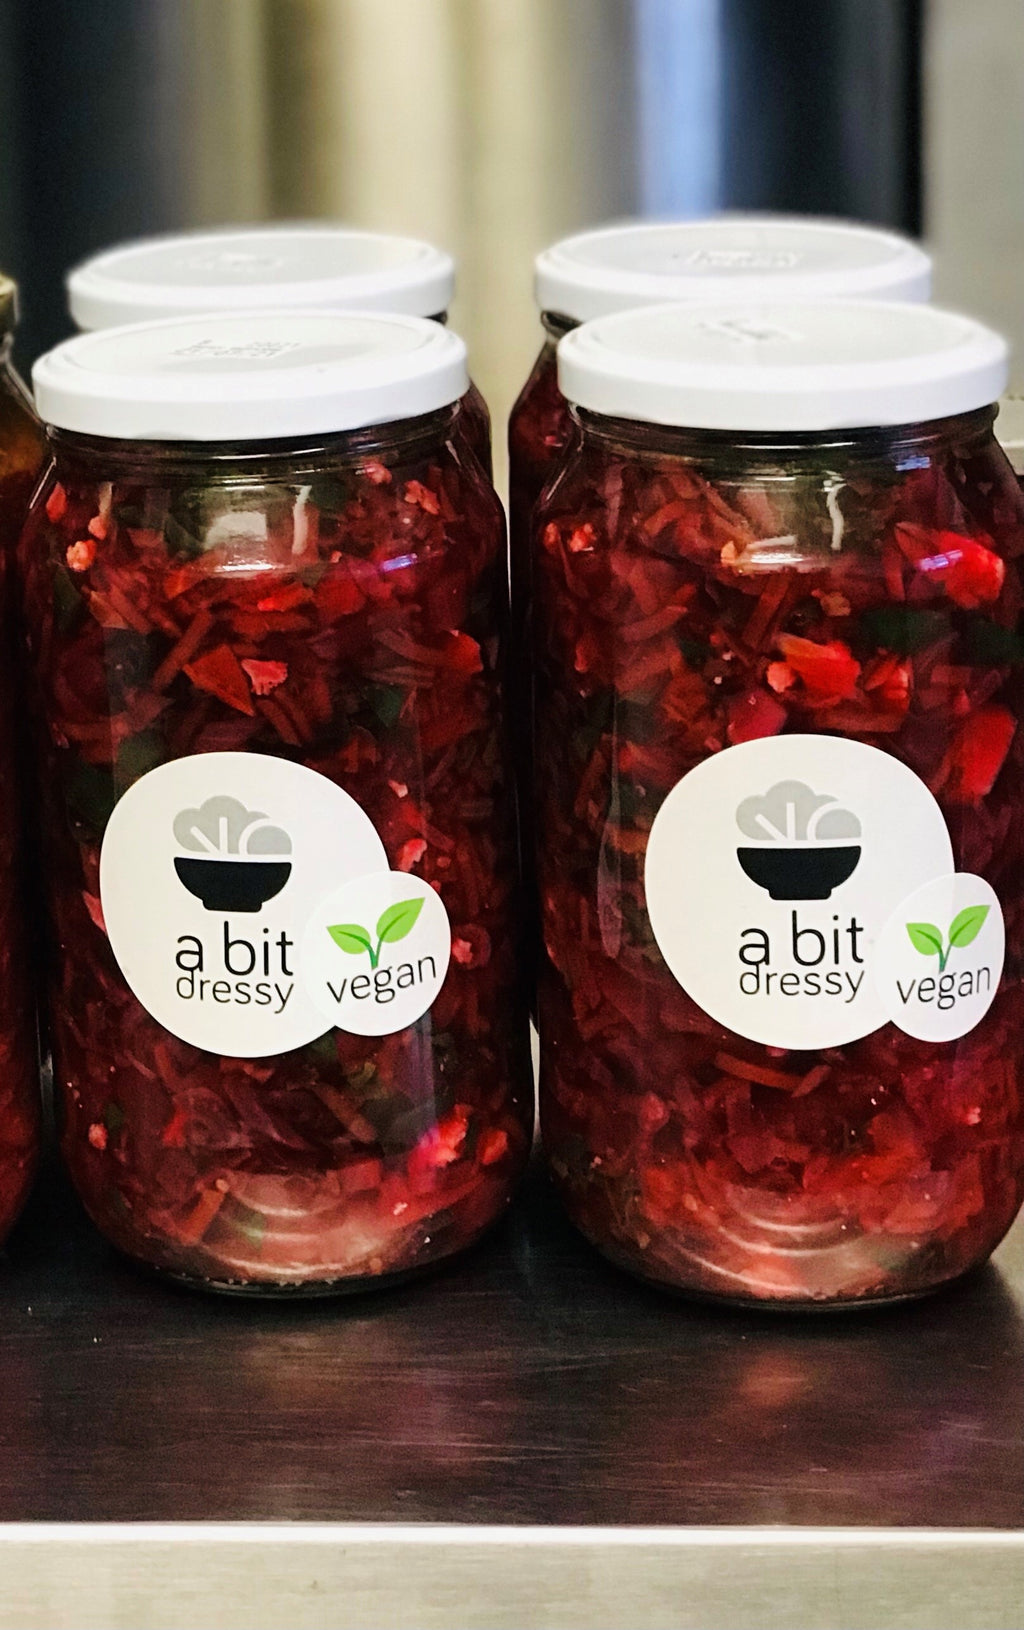 A glass jar filled with vegan borscht, featuring a vibrant, deep-red soup made from beets and other vegetables